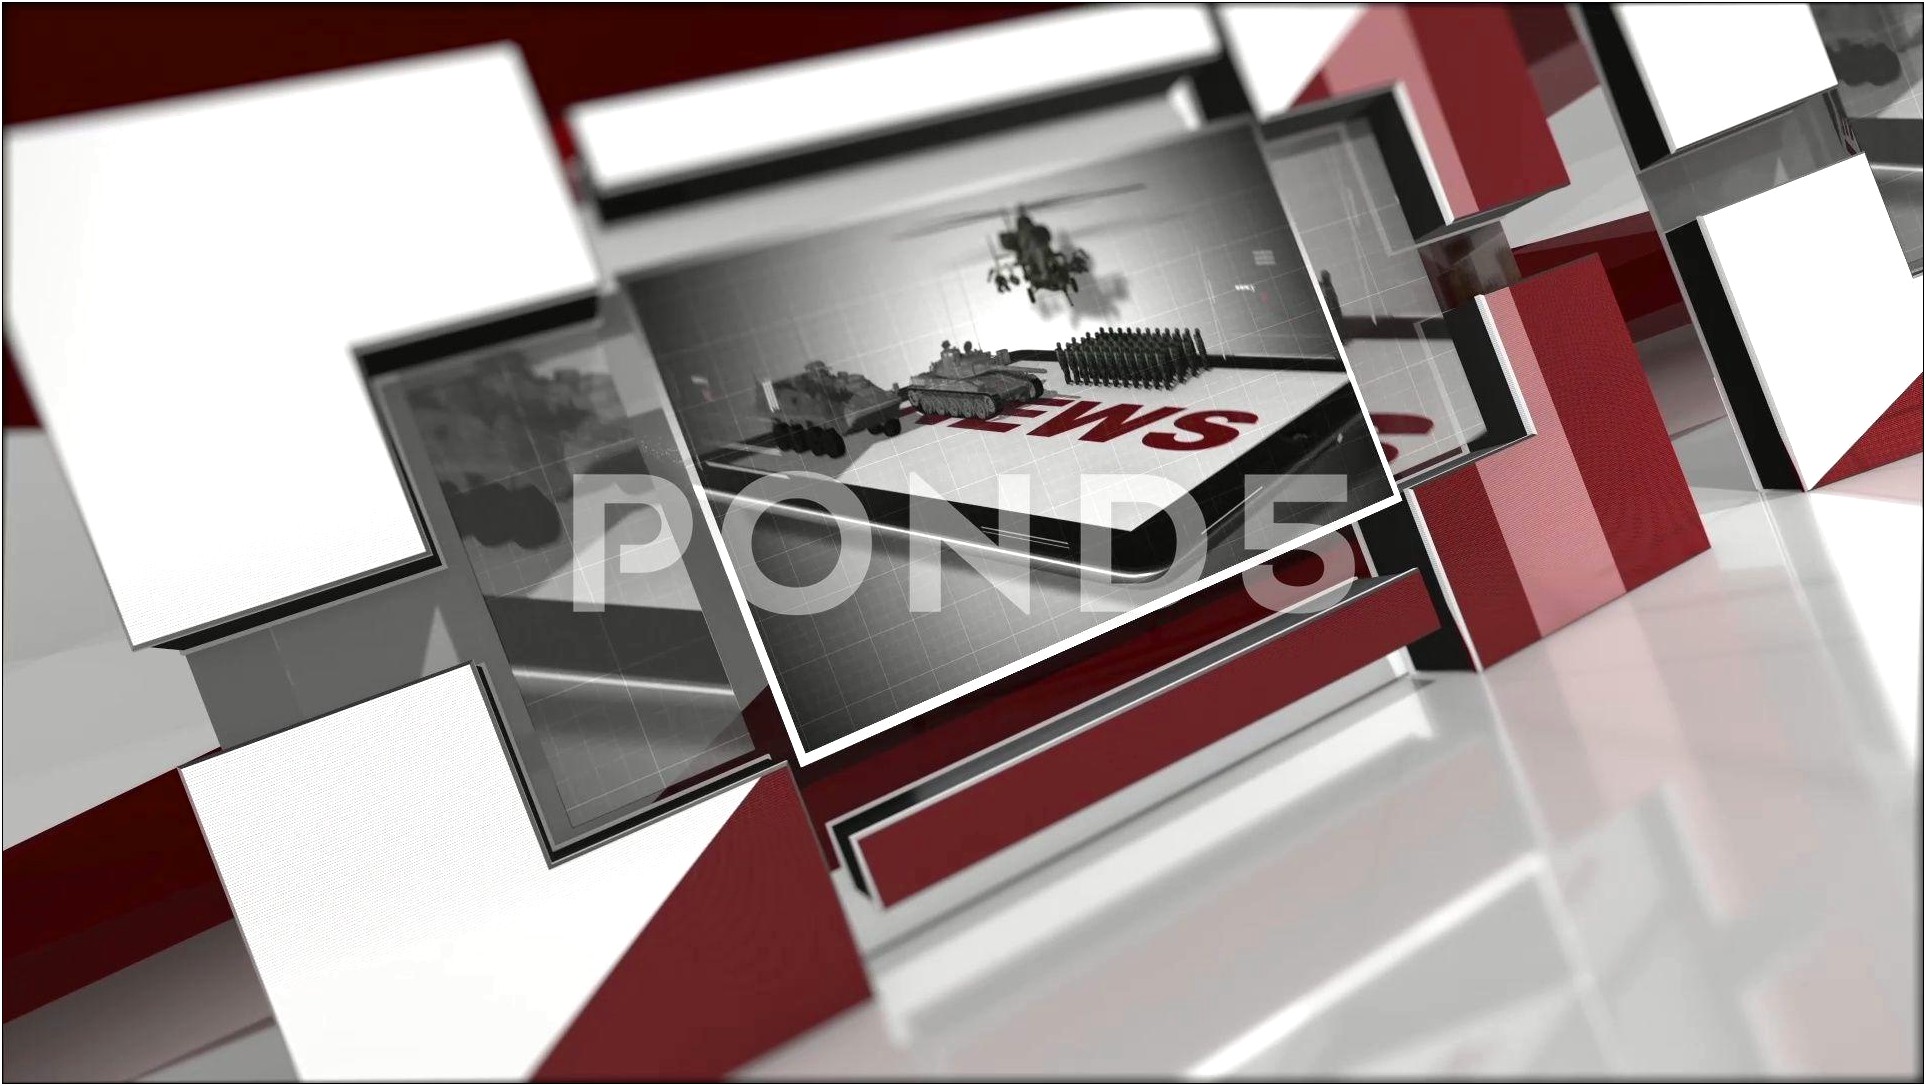 News Intro After Effects Template Download